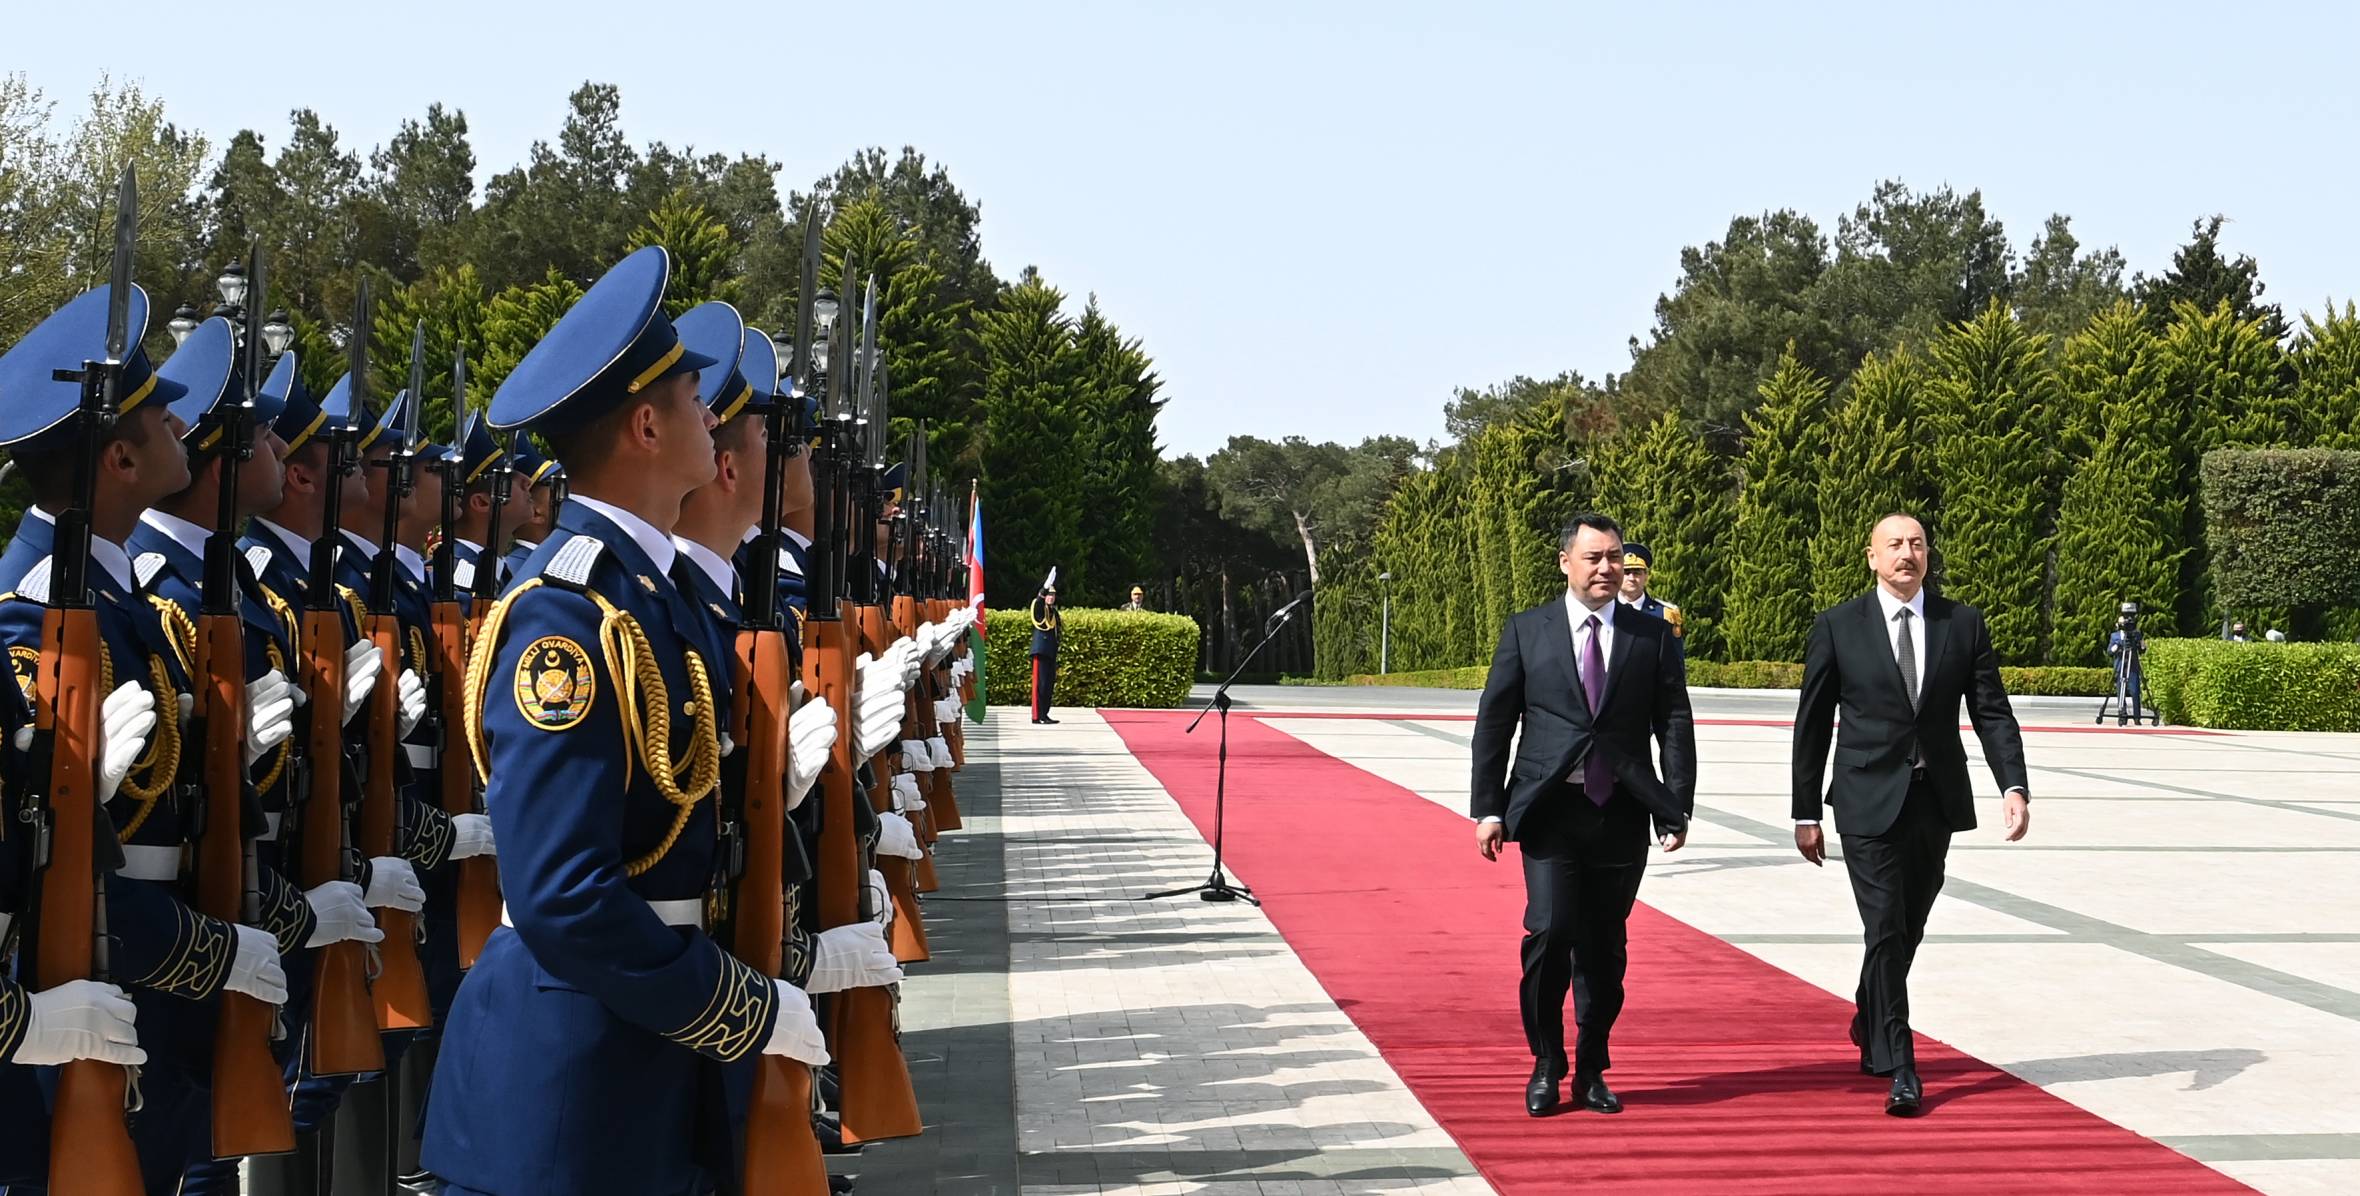 Official welcome ceremony was held for President of Kyrgyzstan Sadyr Japarov